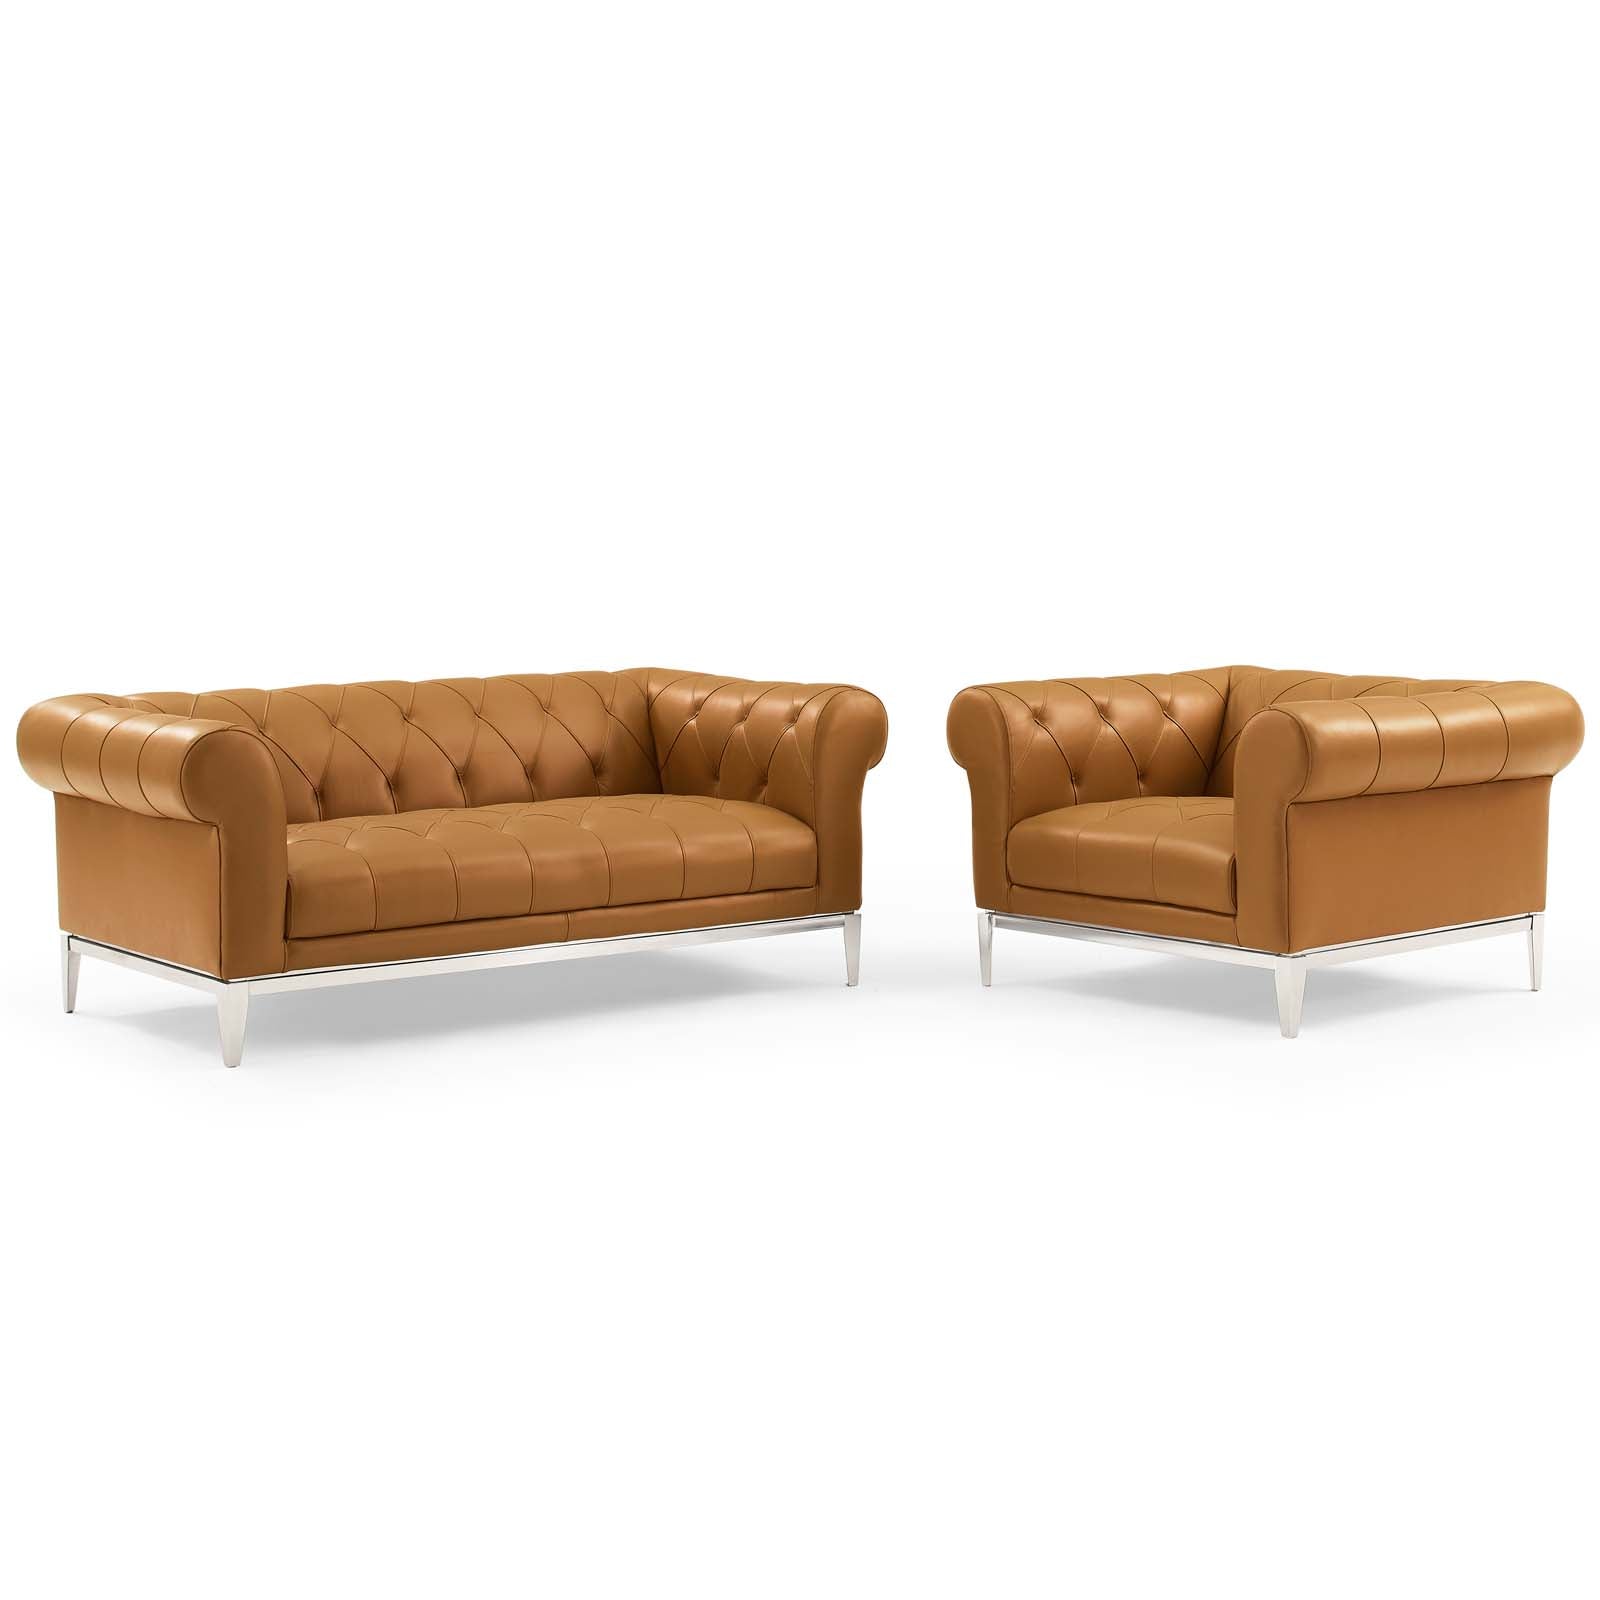 Modway Loveseats - Idyll-Tufted-Upholstered-Leather-Loveseat-and-Armchair-Tan